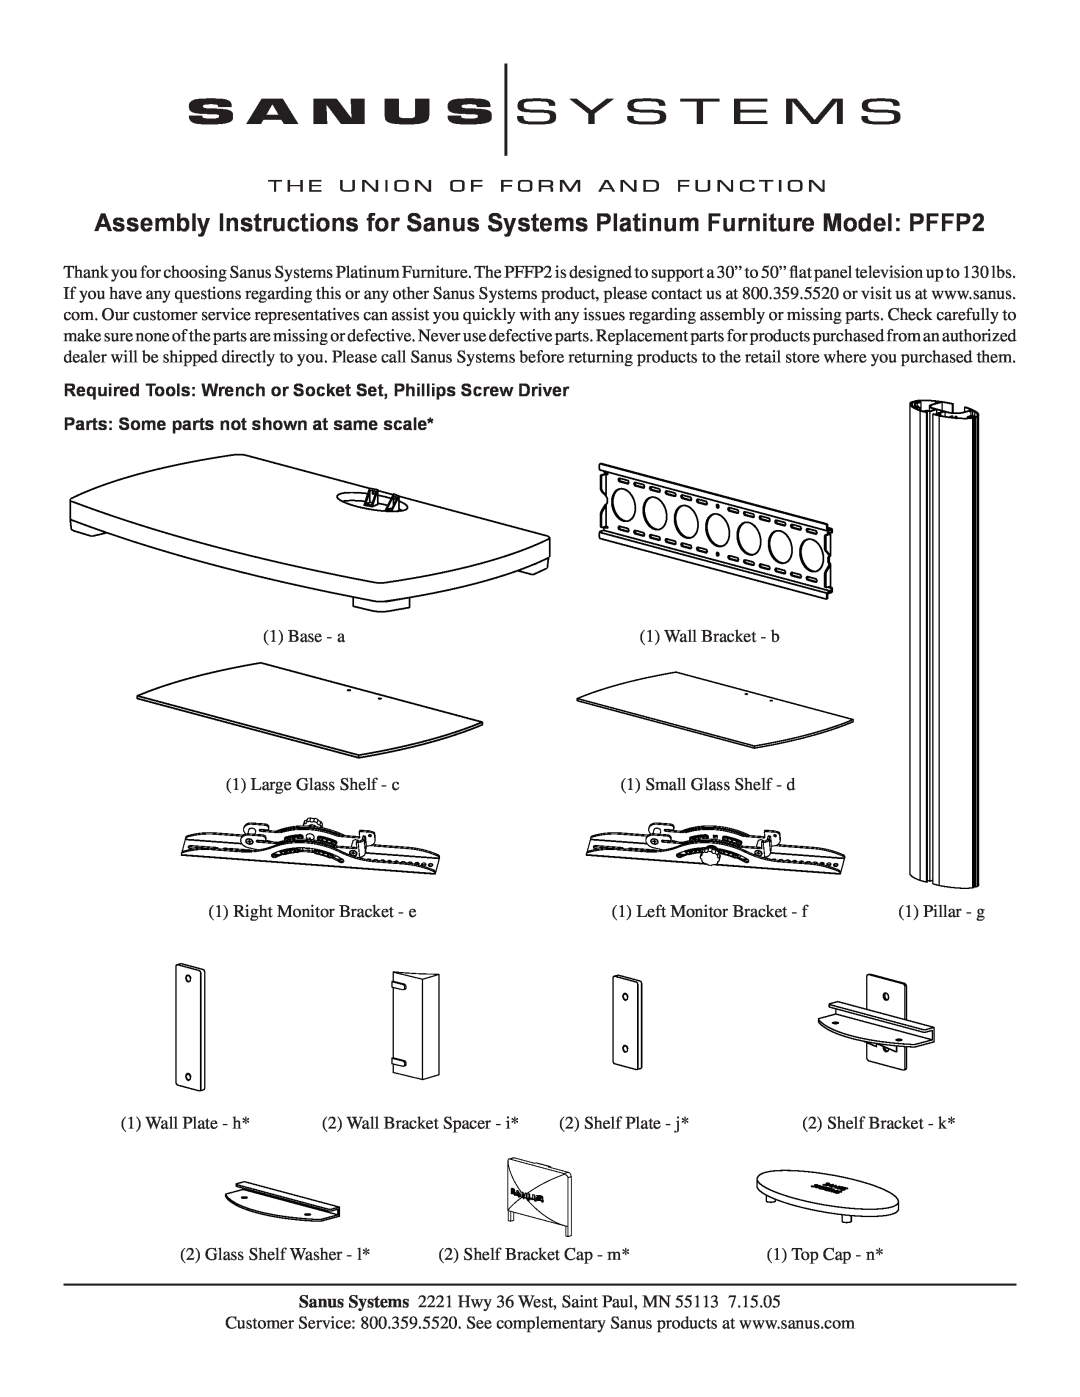 Sanus Systems PFFP2 manual Parts Some parts not shown at same scale 